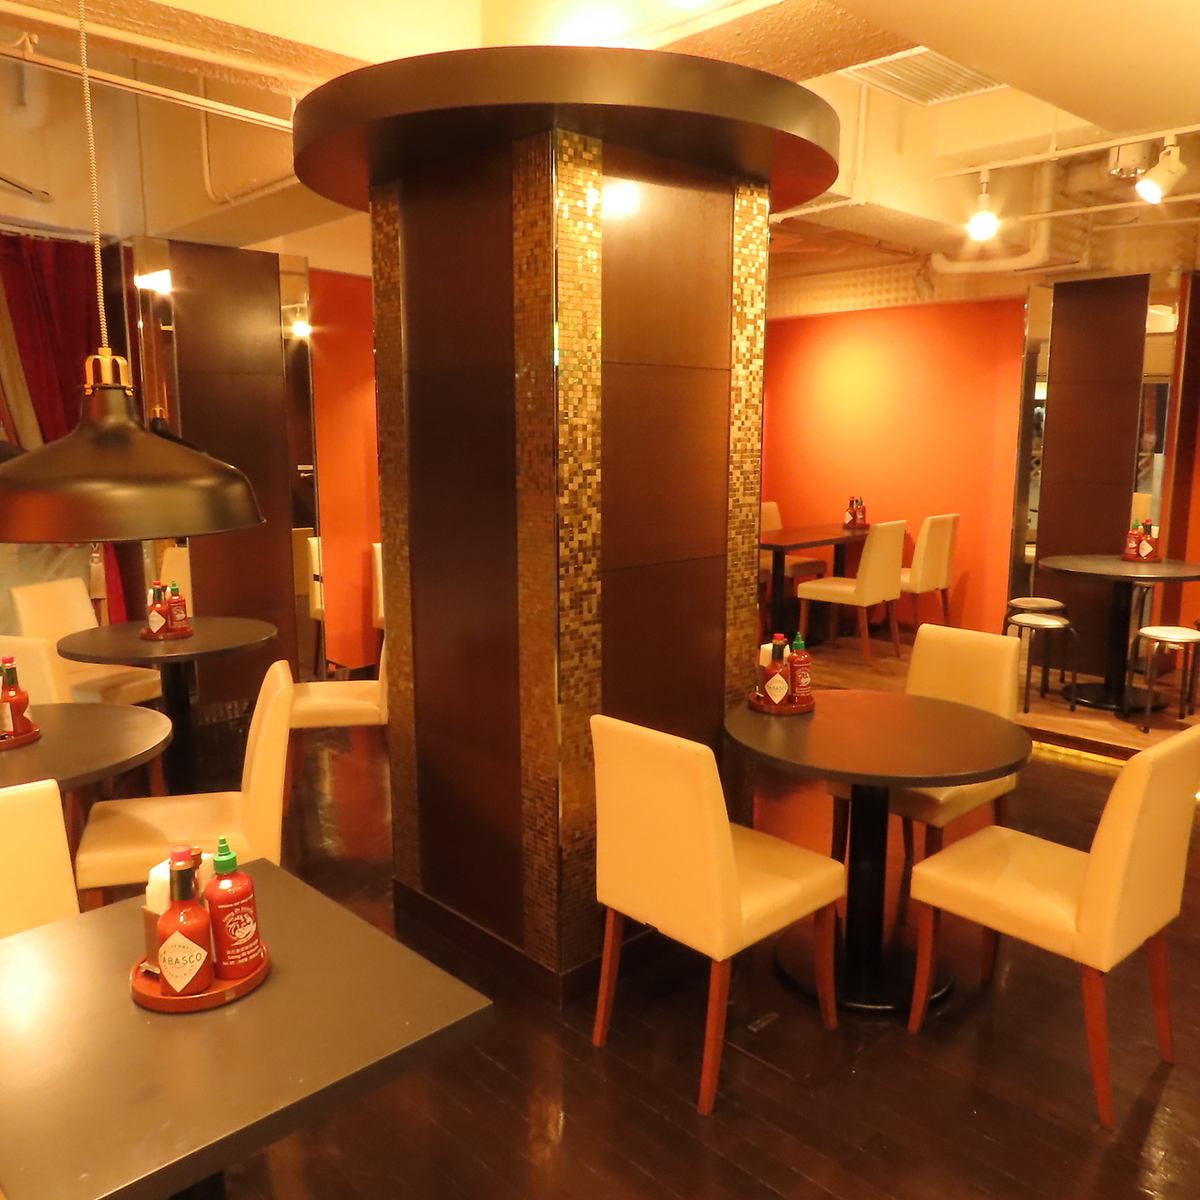 You can enjoy jazz in a calm and stylish interior♪